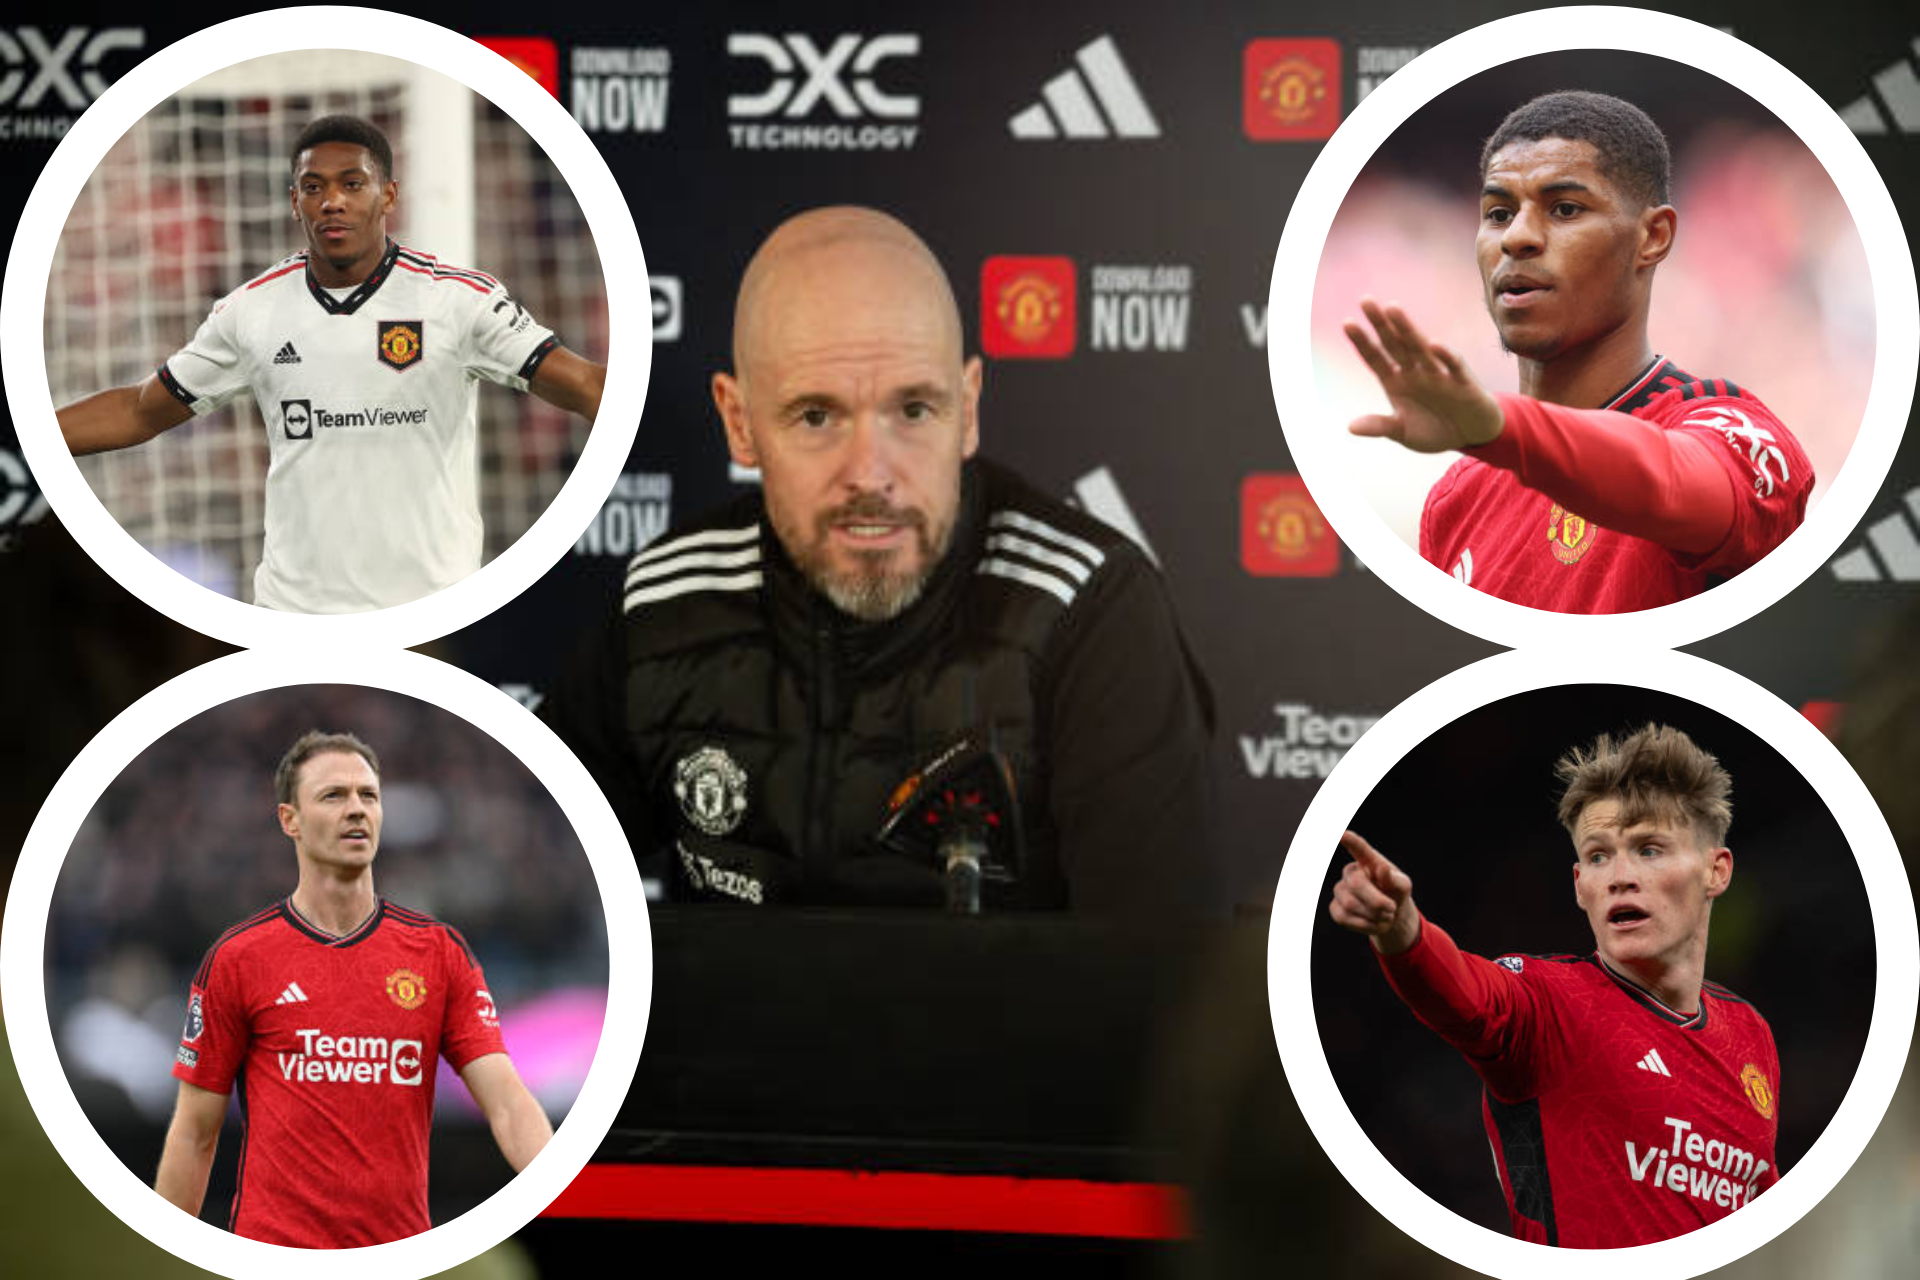 Ten Hag out of time at Man United, former players say